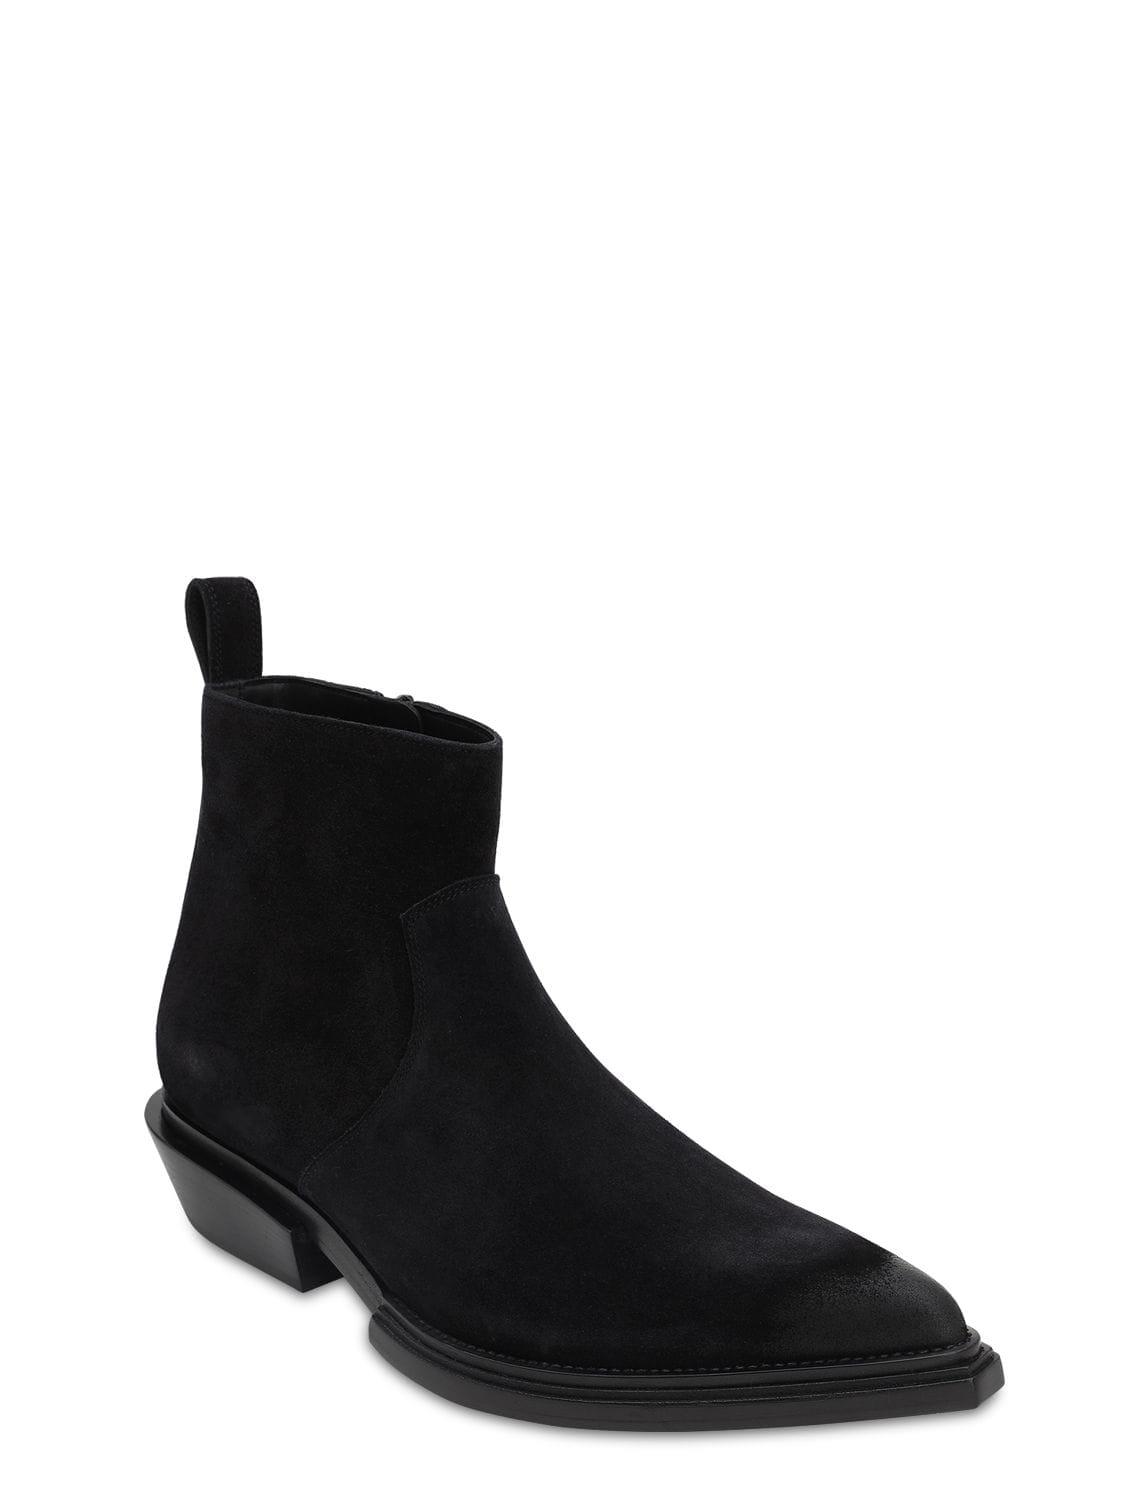 Balenciaga Santiago Suede Leather Boots in Black for Men | Lyst